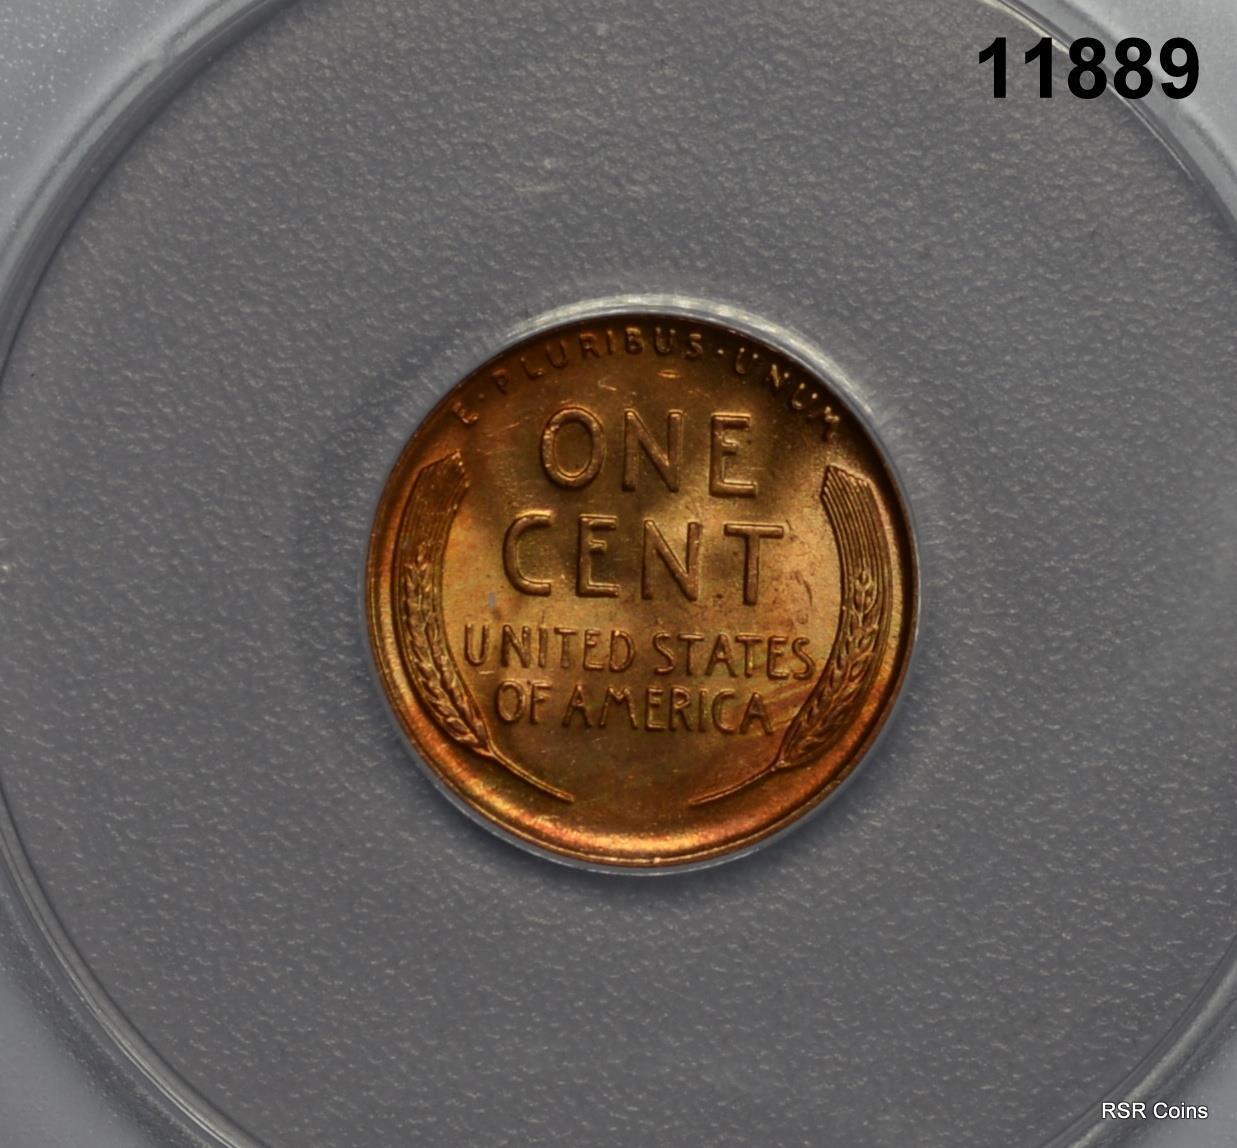 1947 LINCOLN CENT ANACS CERTIFIED MS66 RD FIRE RED#11889